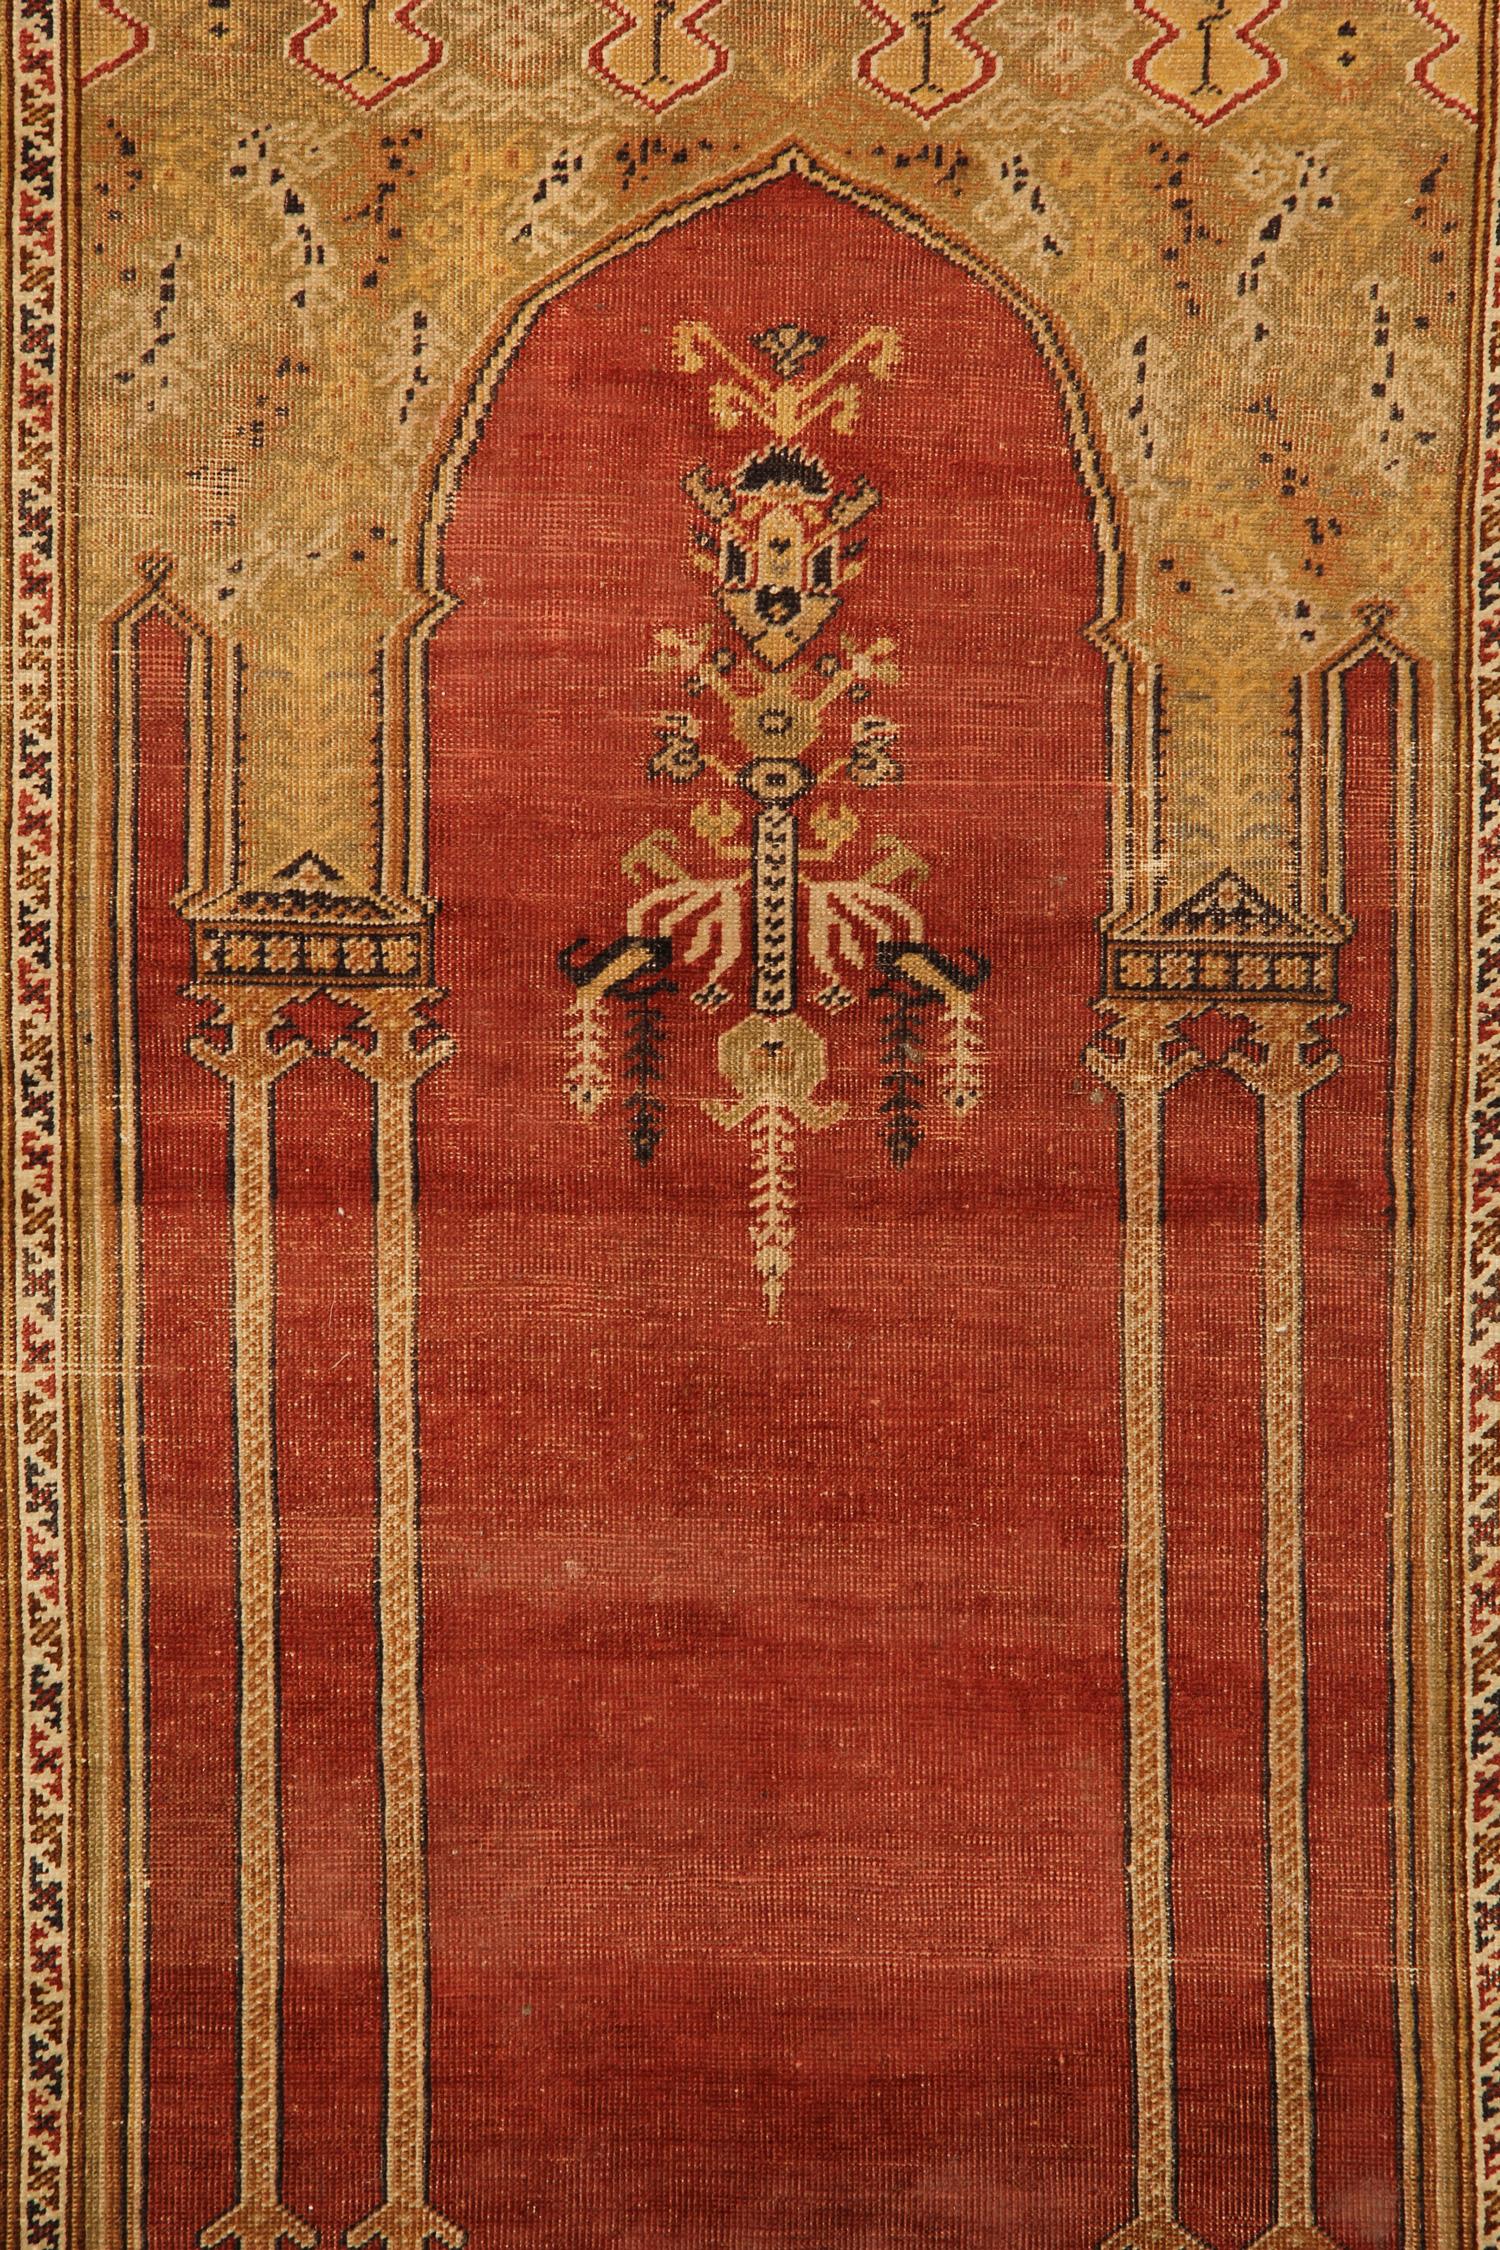 The design of this carpet is most distinctive and has been known as a prayer design for over a thousand years. One can find the connotation of the design back to pre-Islamic Persiann, where the architectural plan was coined and implemented by